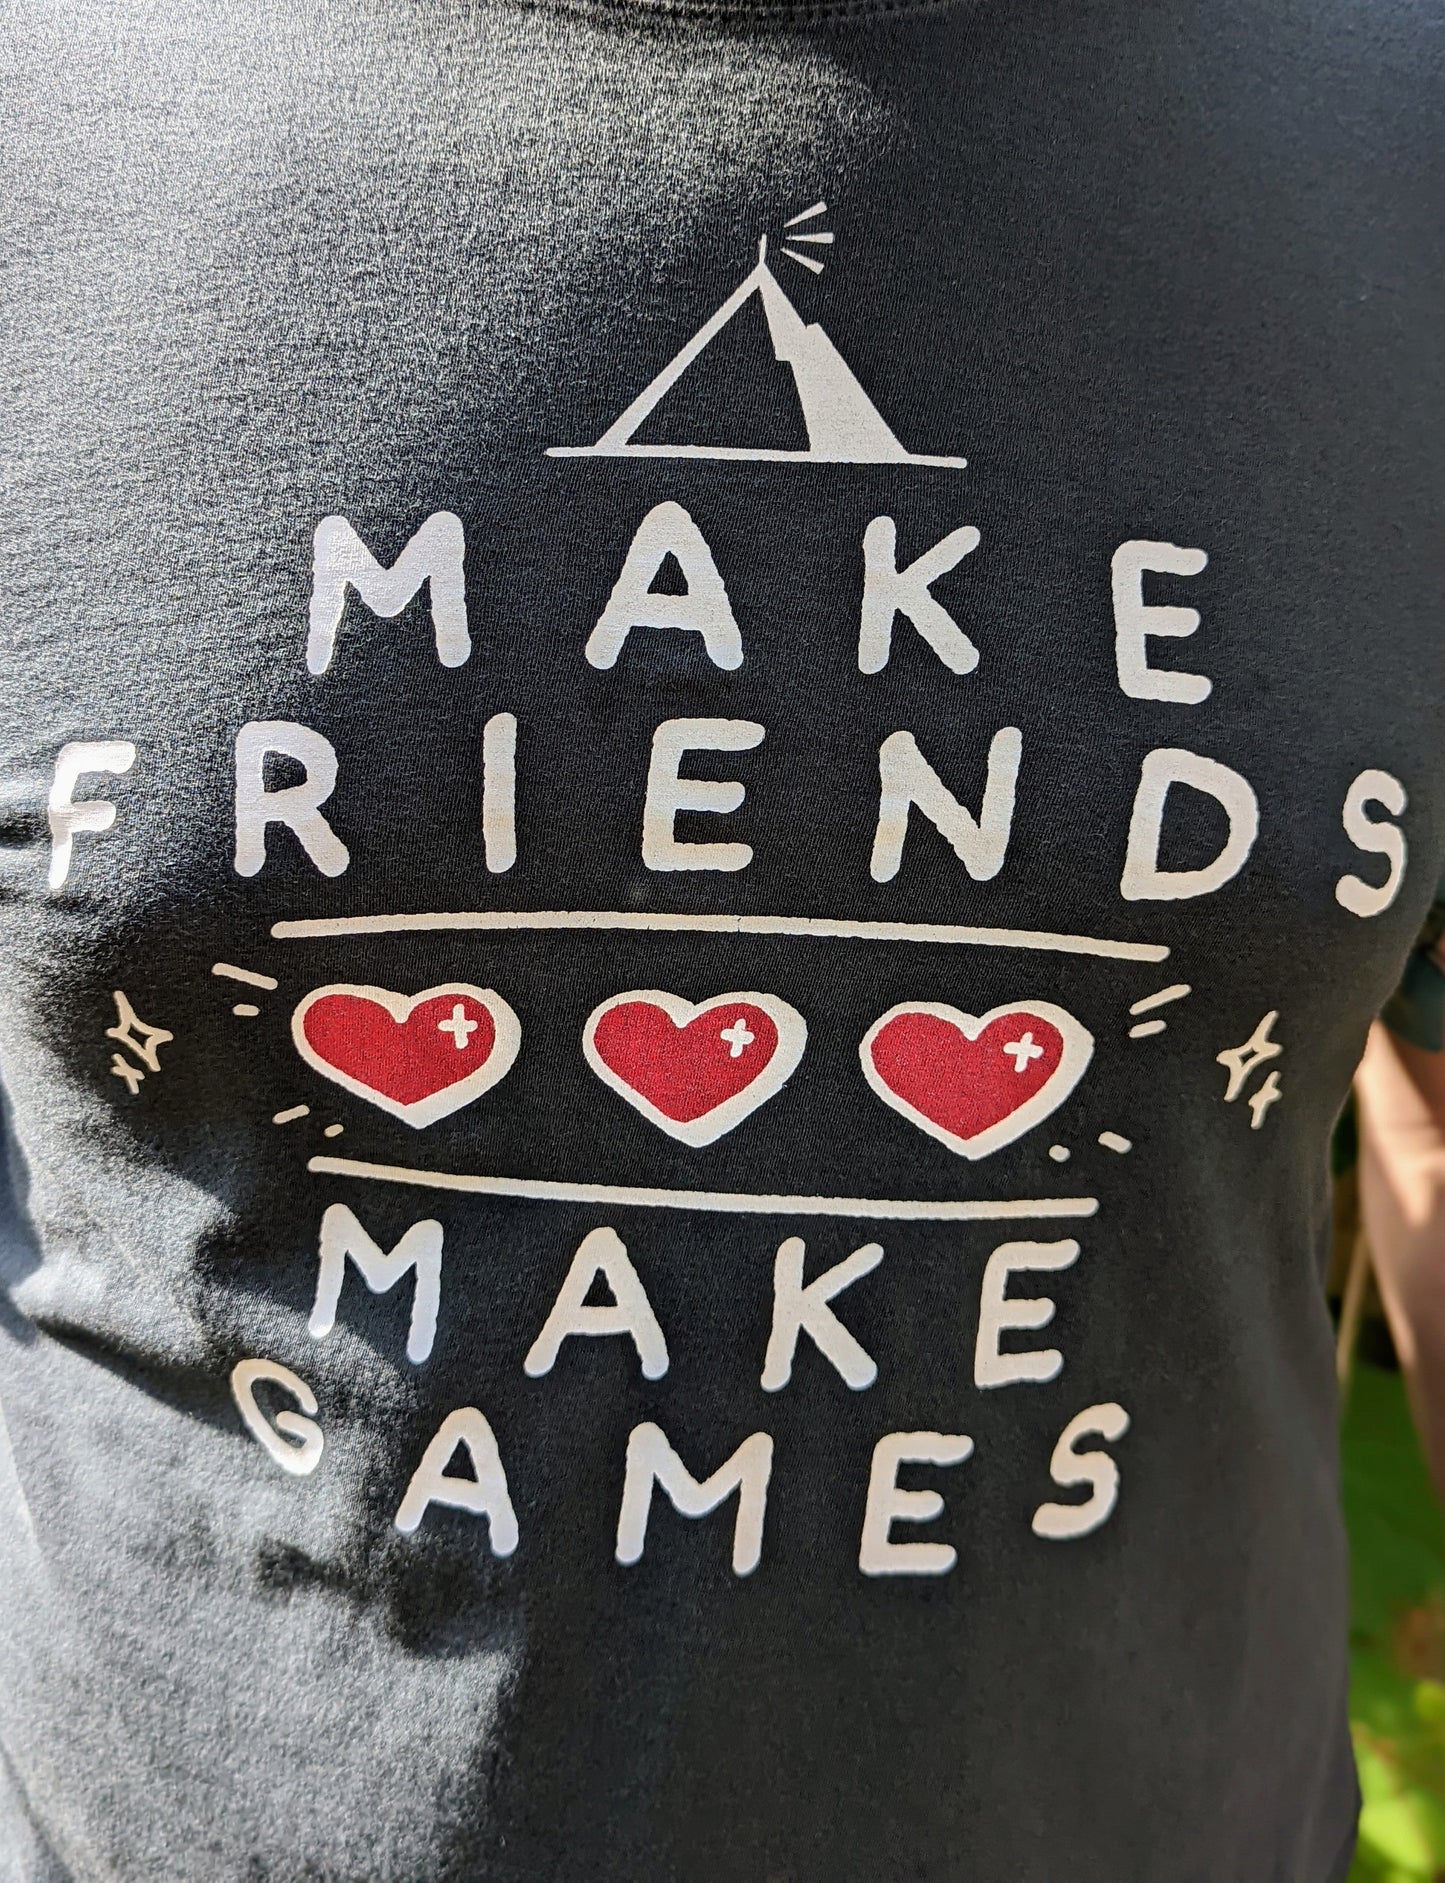 A t-shirt with the words "Make Friends Make Games," featuring 3 hearts like in a Zelda Game, and the MIghty Yell Mountain Logo, arranged aesthetically on the front of the shirt. Charcoal grey shirt with white text and red hearts.